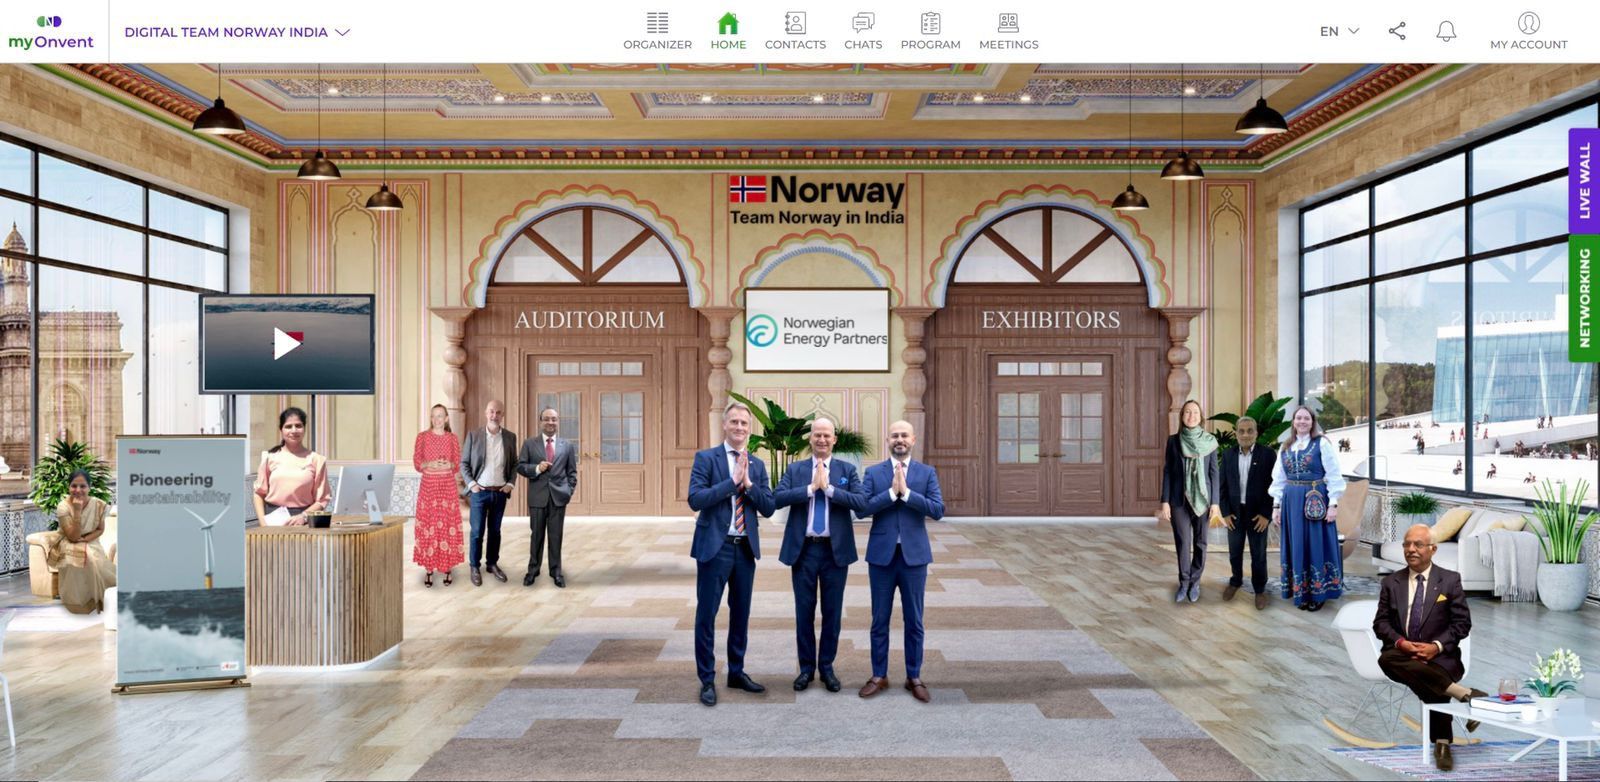 Lobby showing custom design for the Team Norway India project